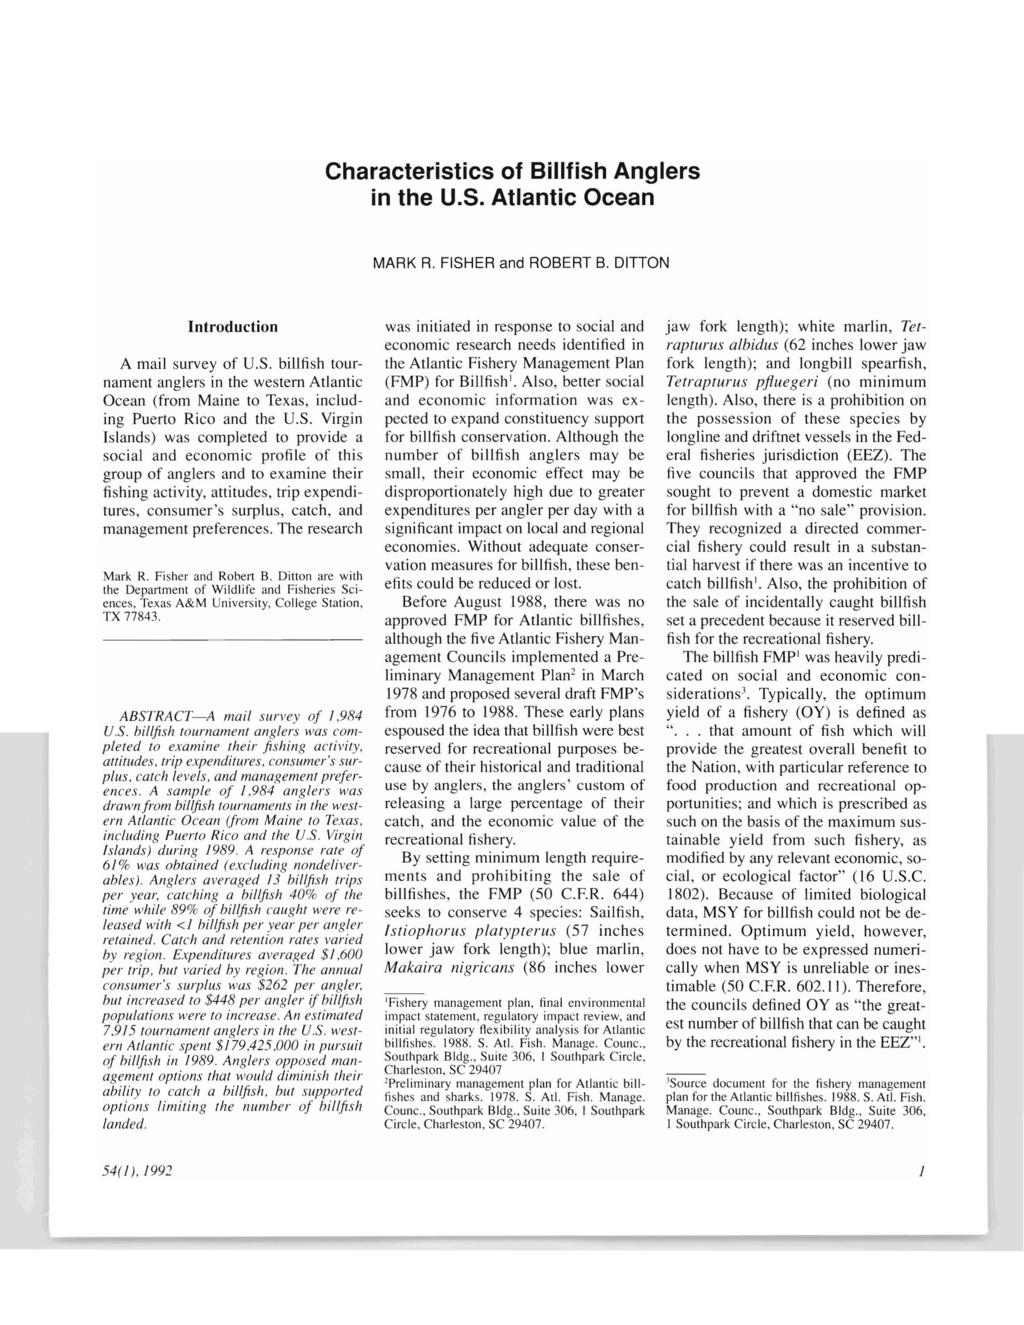 Characteristics of Billfish Anglers in the U.S. Atlantic Ocean MARK R. FISHER and ROBERT B. DITTON Introduction A mail survey of U.S. billfish tournament anglers in the western Atlantic Ocean (from Maine to Texas, including Puerto Rico and the U.